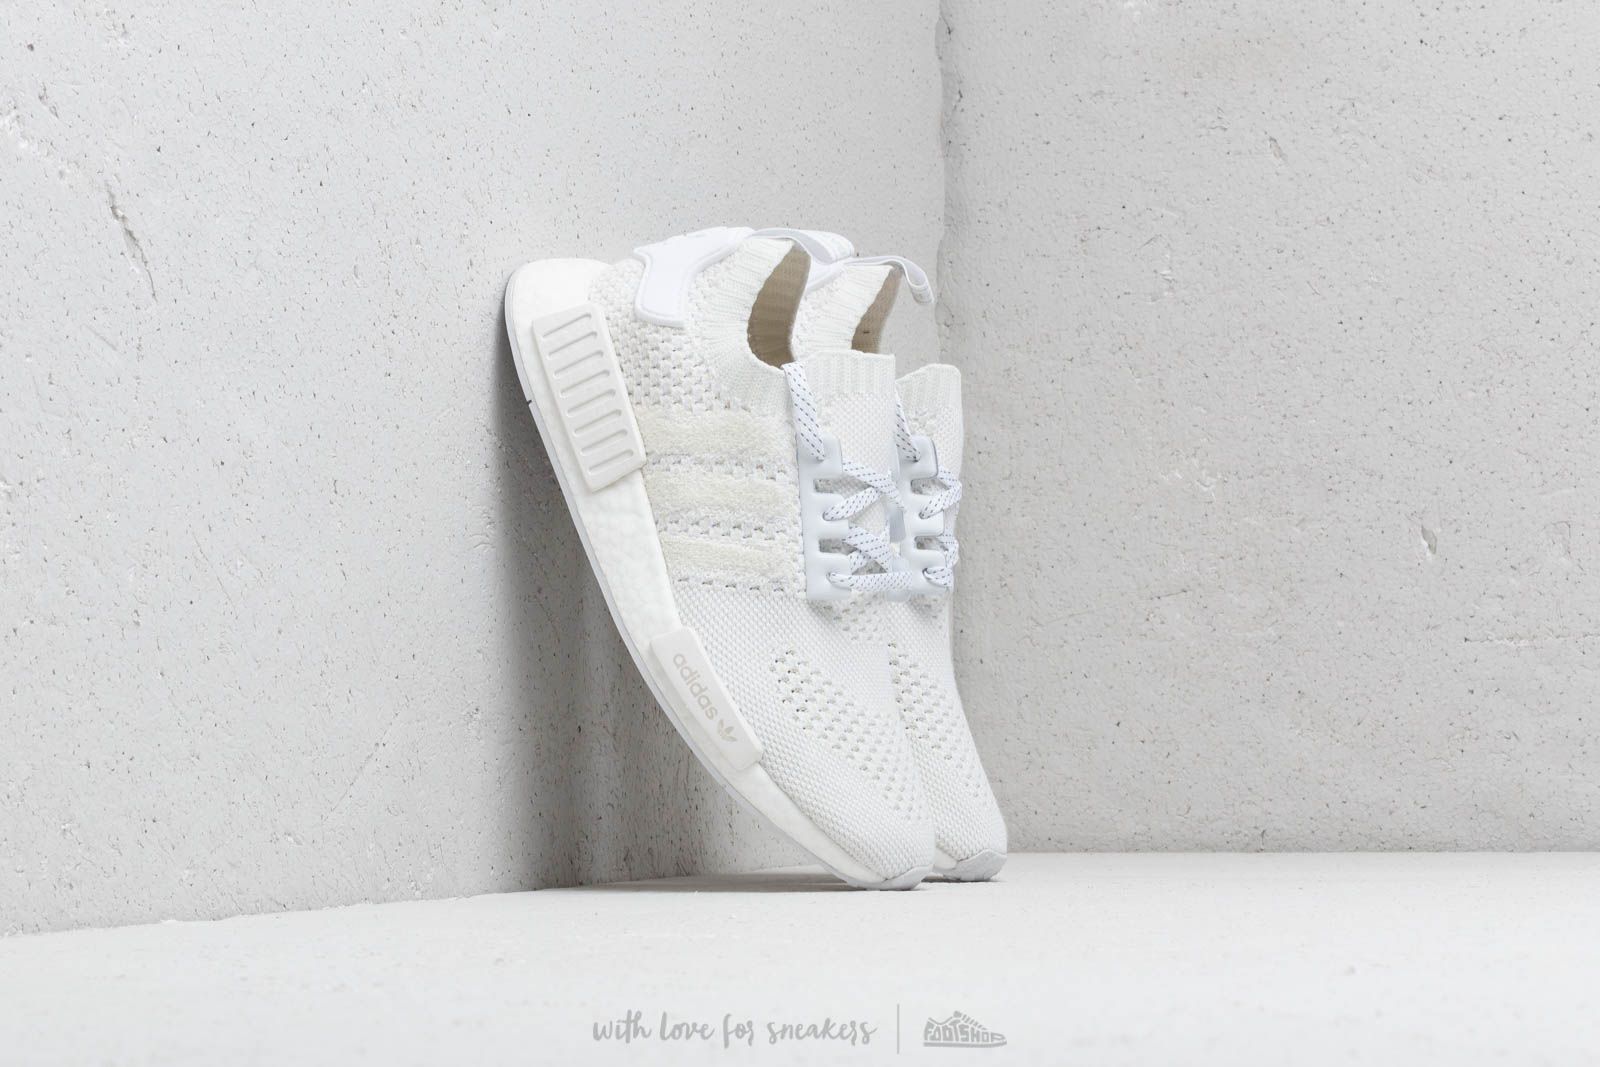 Chaussures et baskets homme adidas NMD_R1 Primeknit Ftw White/ Ftw White/ Linen Green